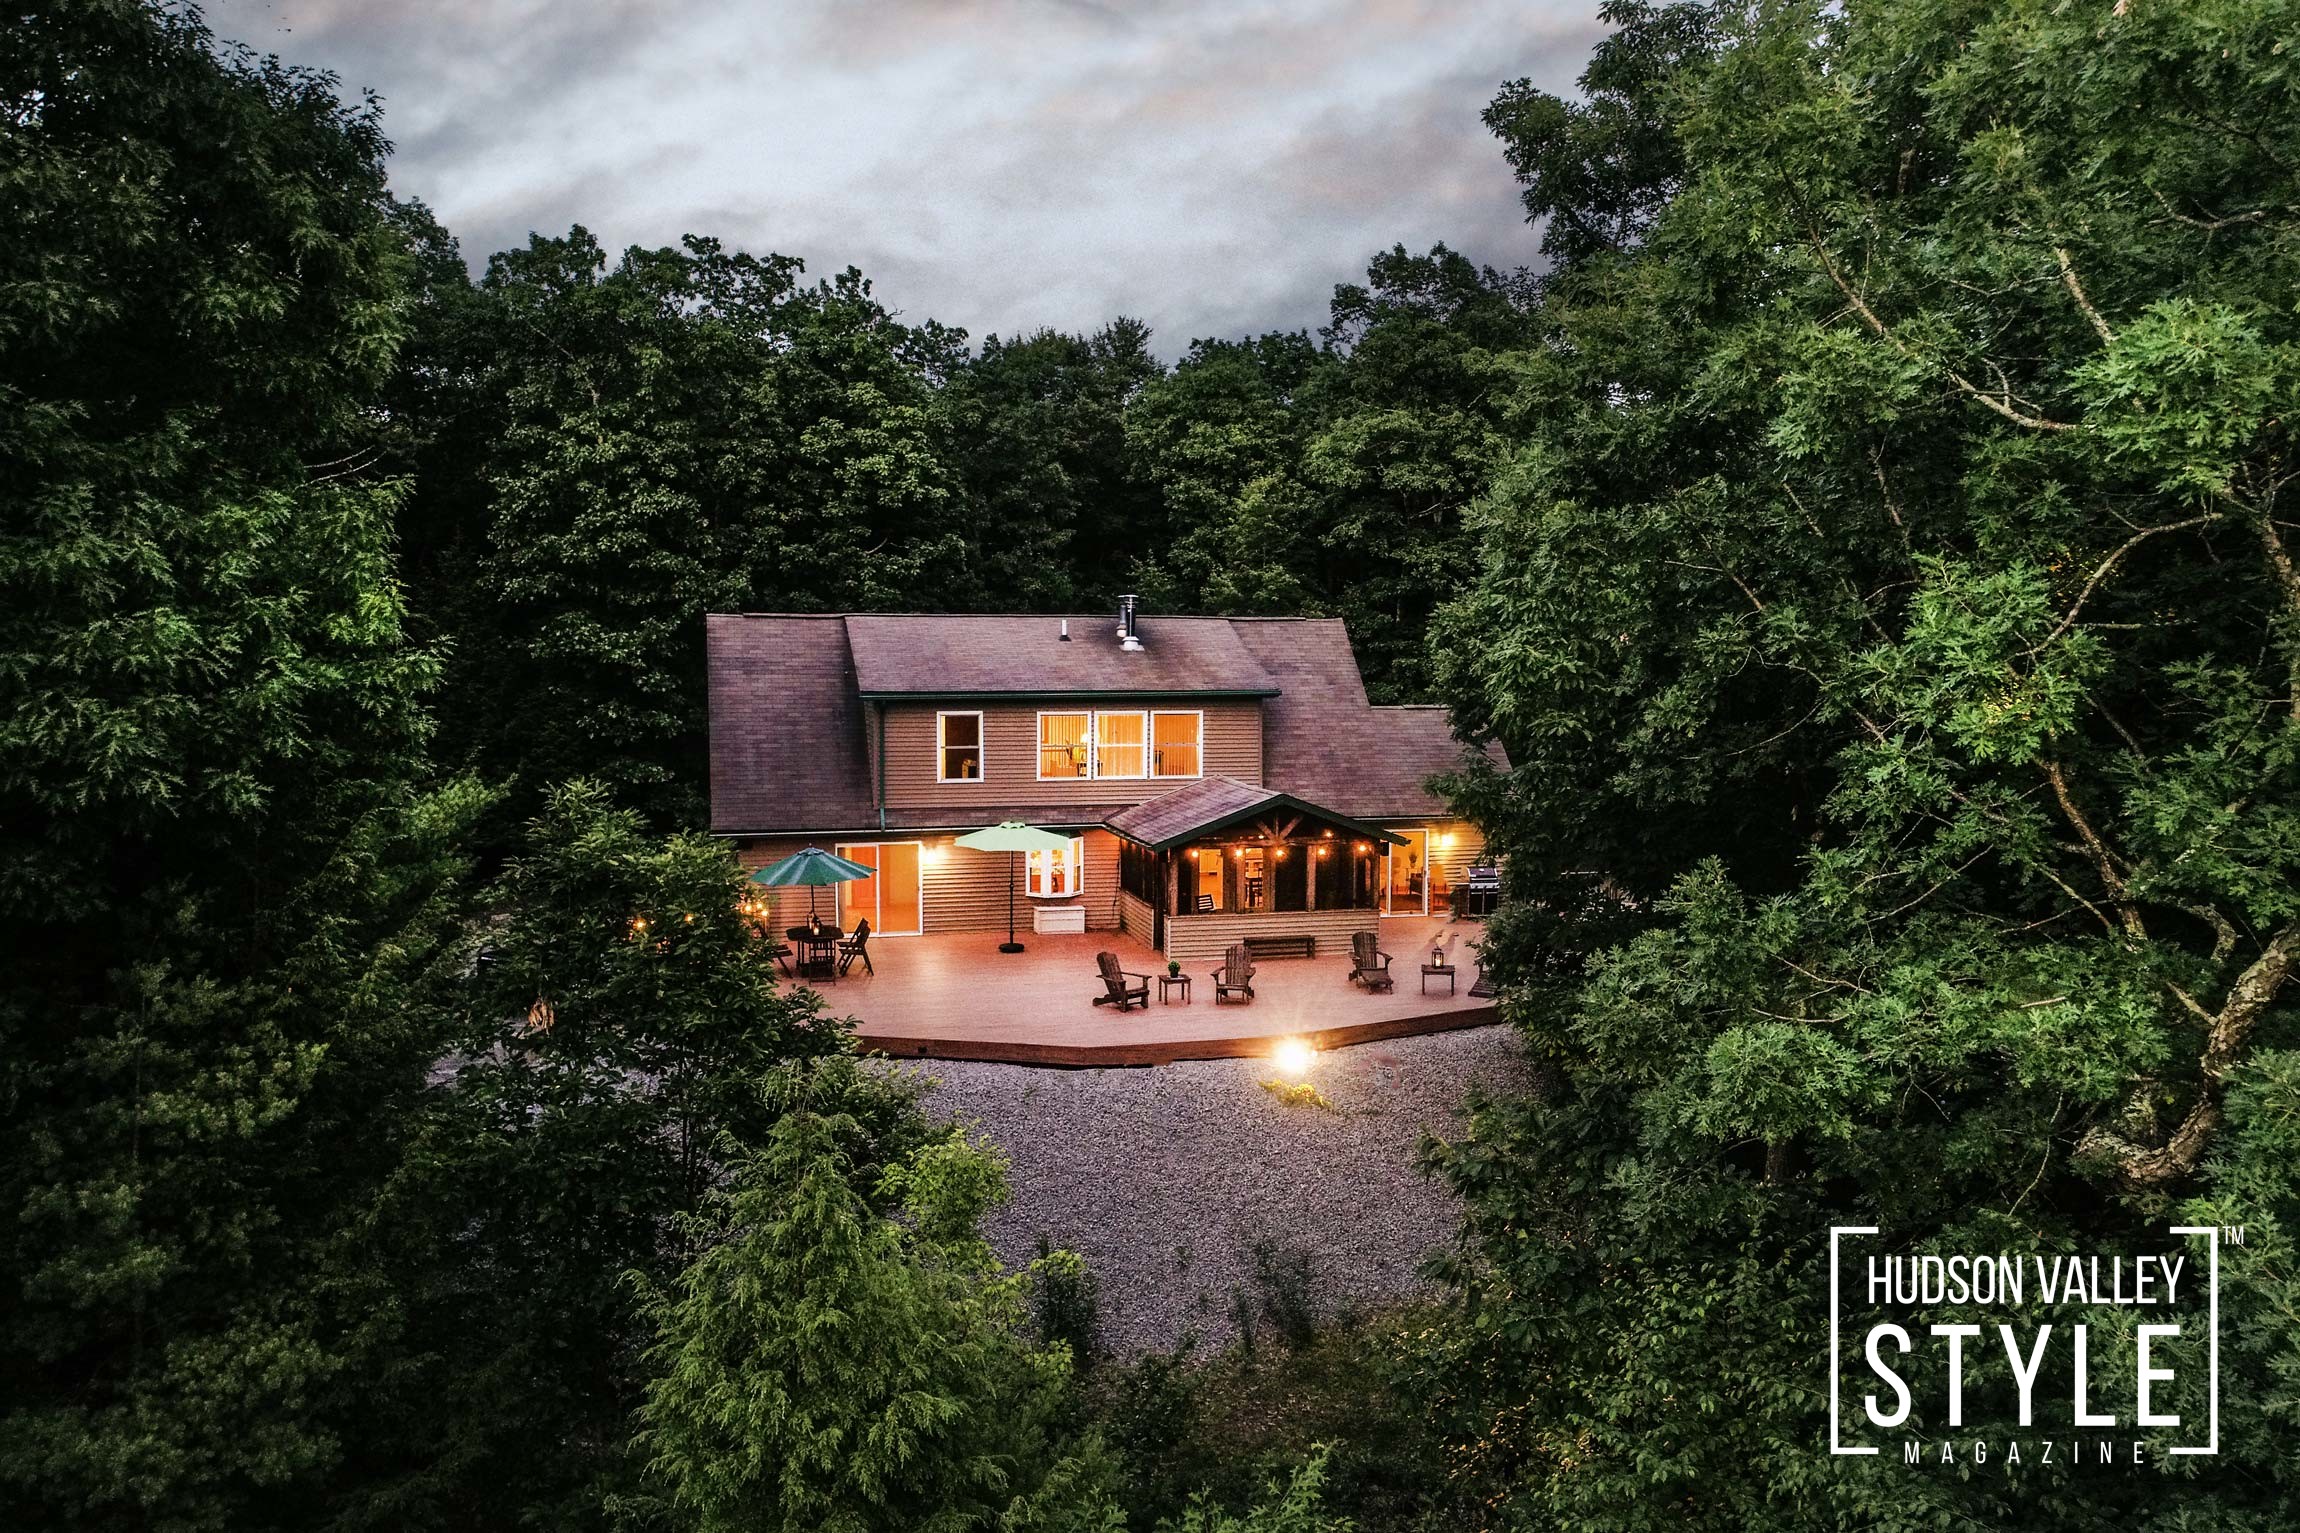 Villa Tondo - Luxury Vacation Home in Hudson Valley's Town of Saugerties Community